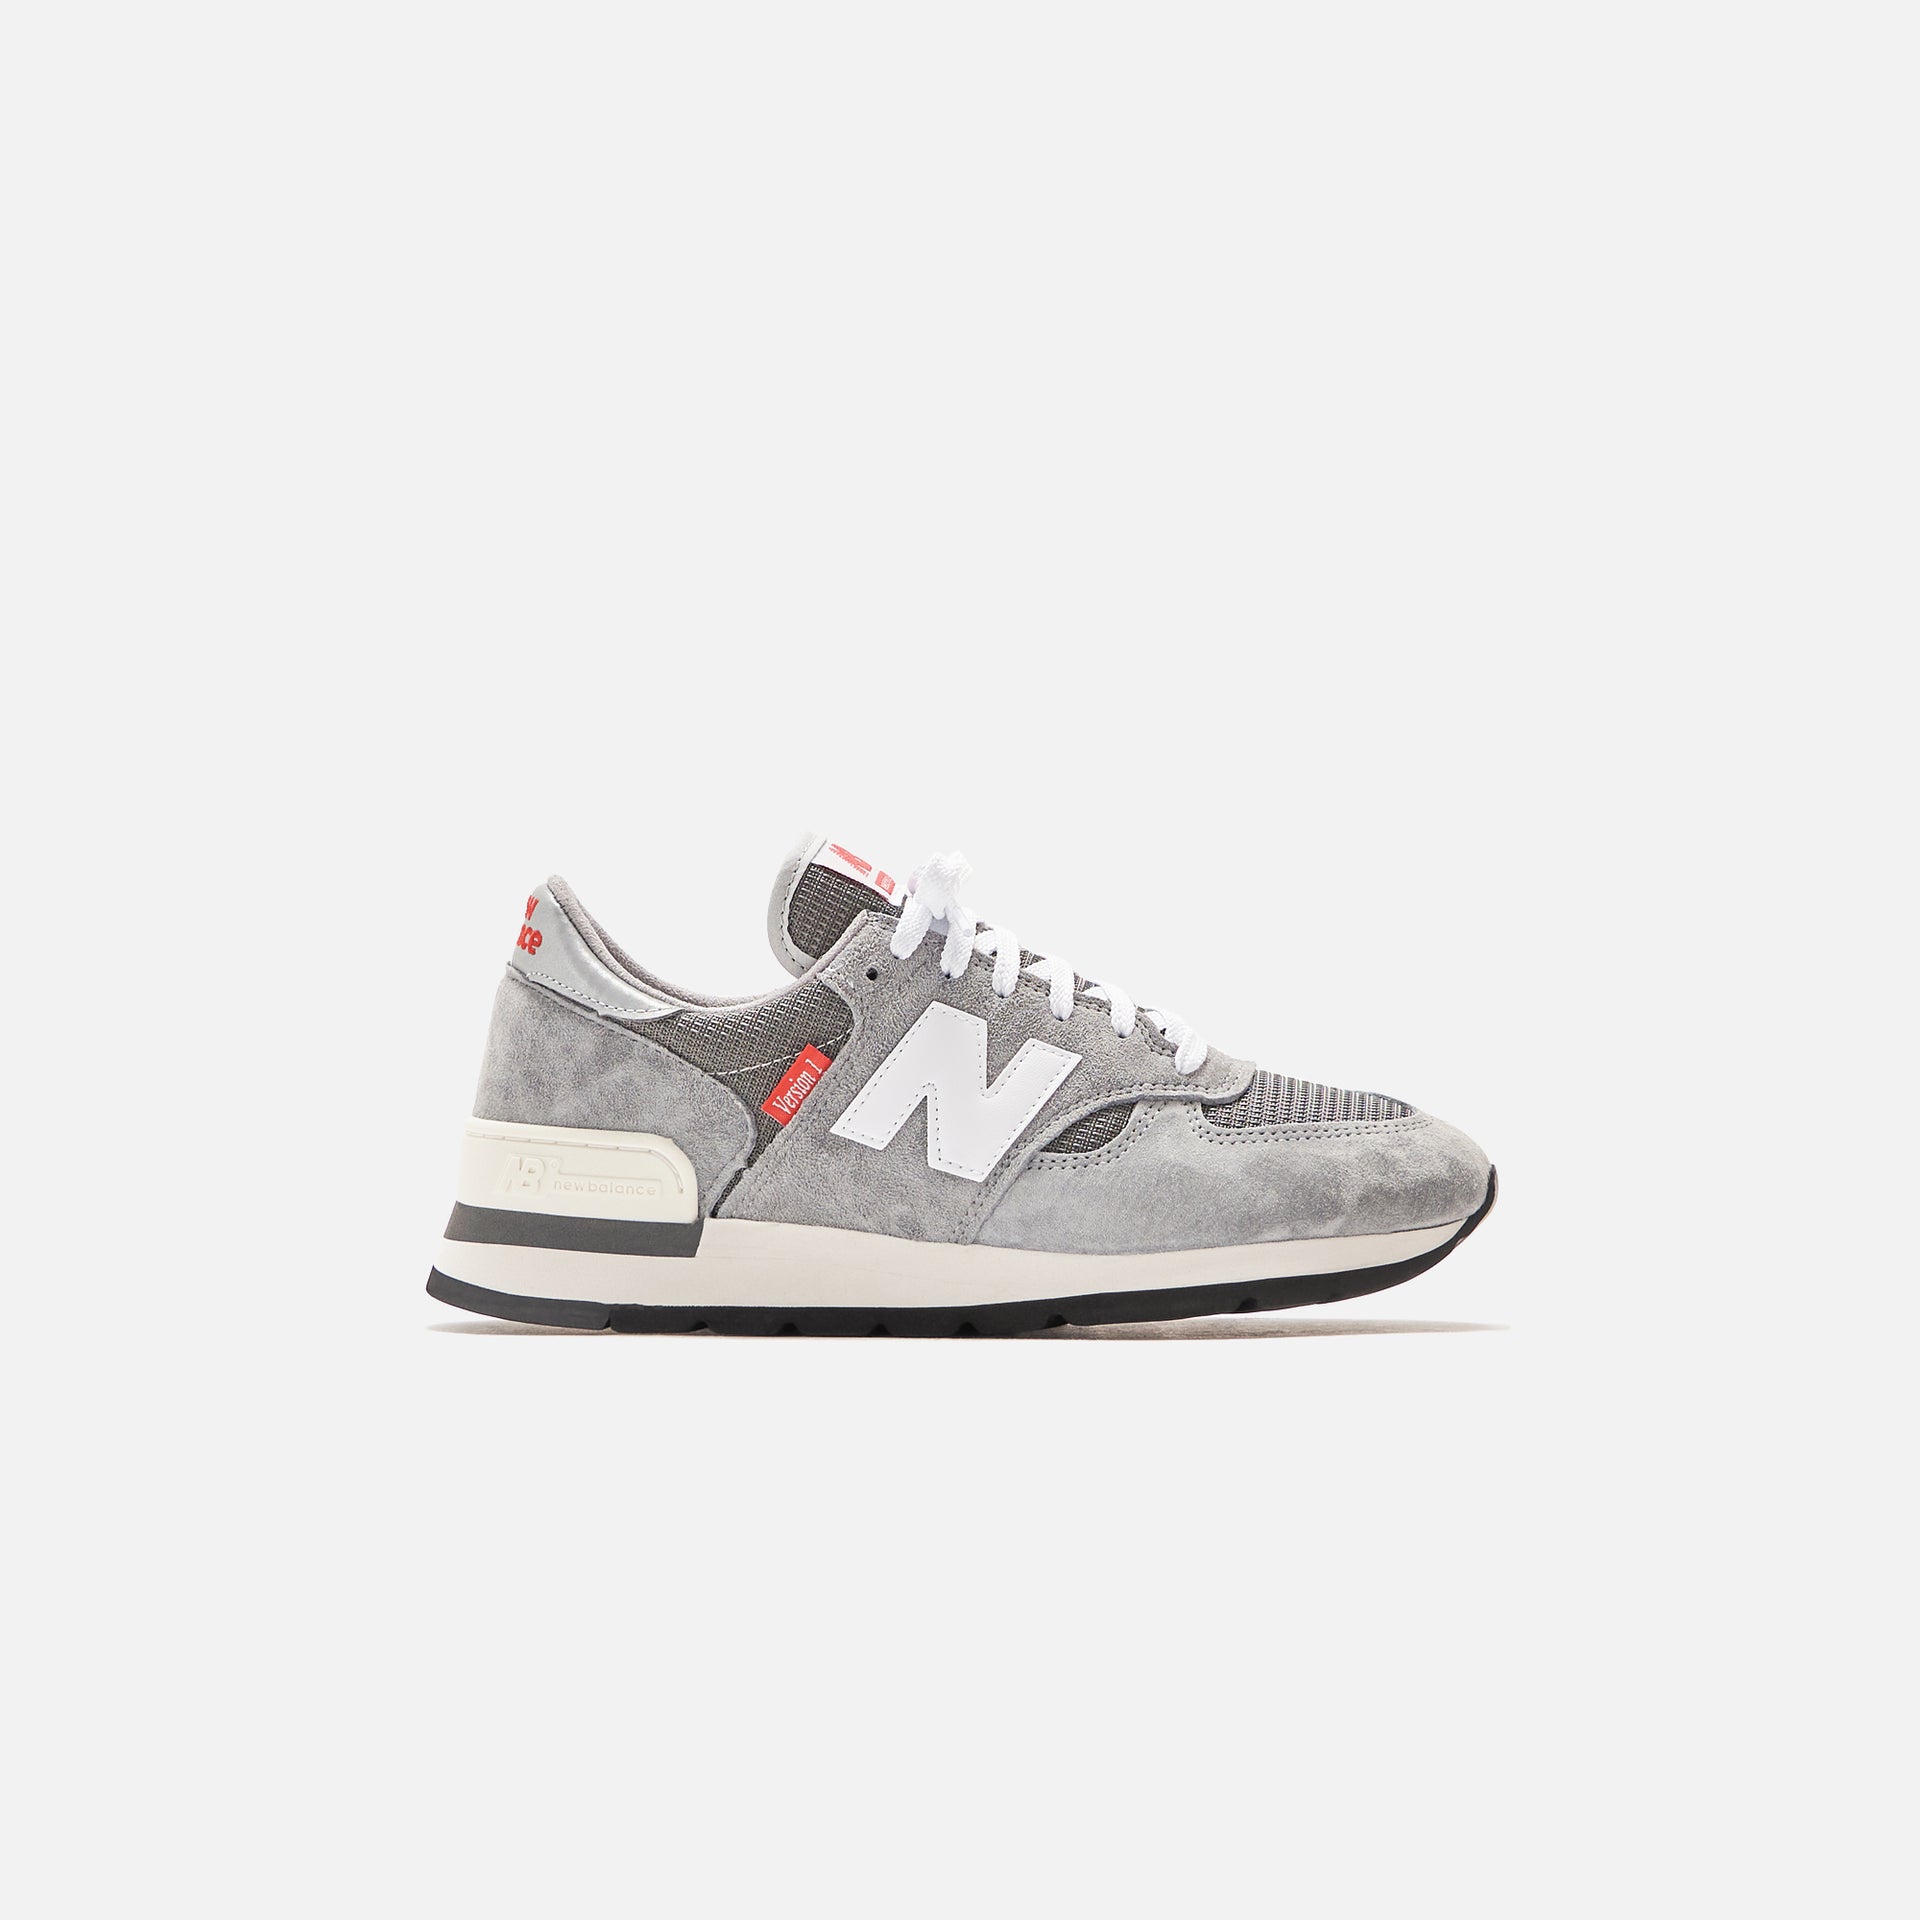 New Balance Made in US 990v1 - Grey / Red